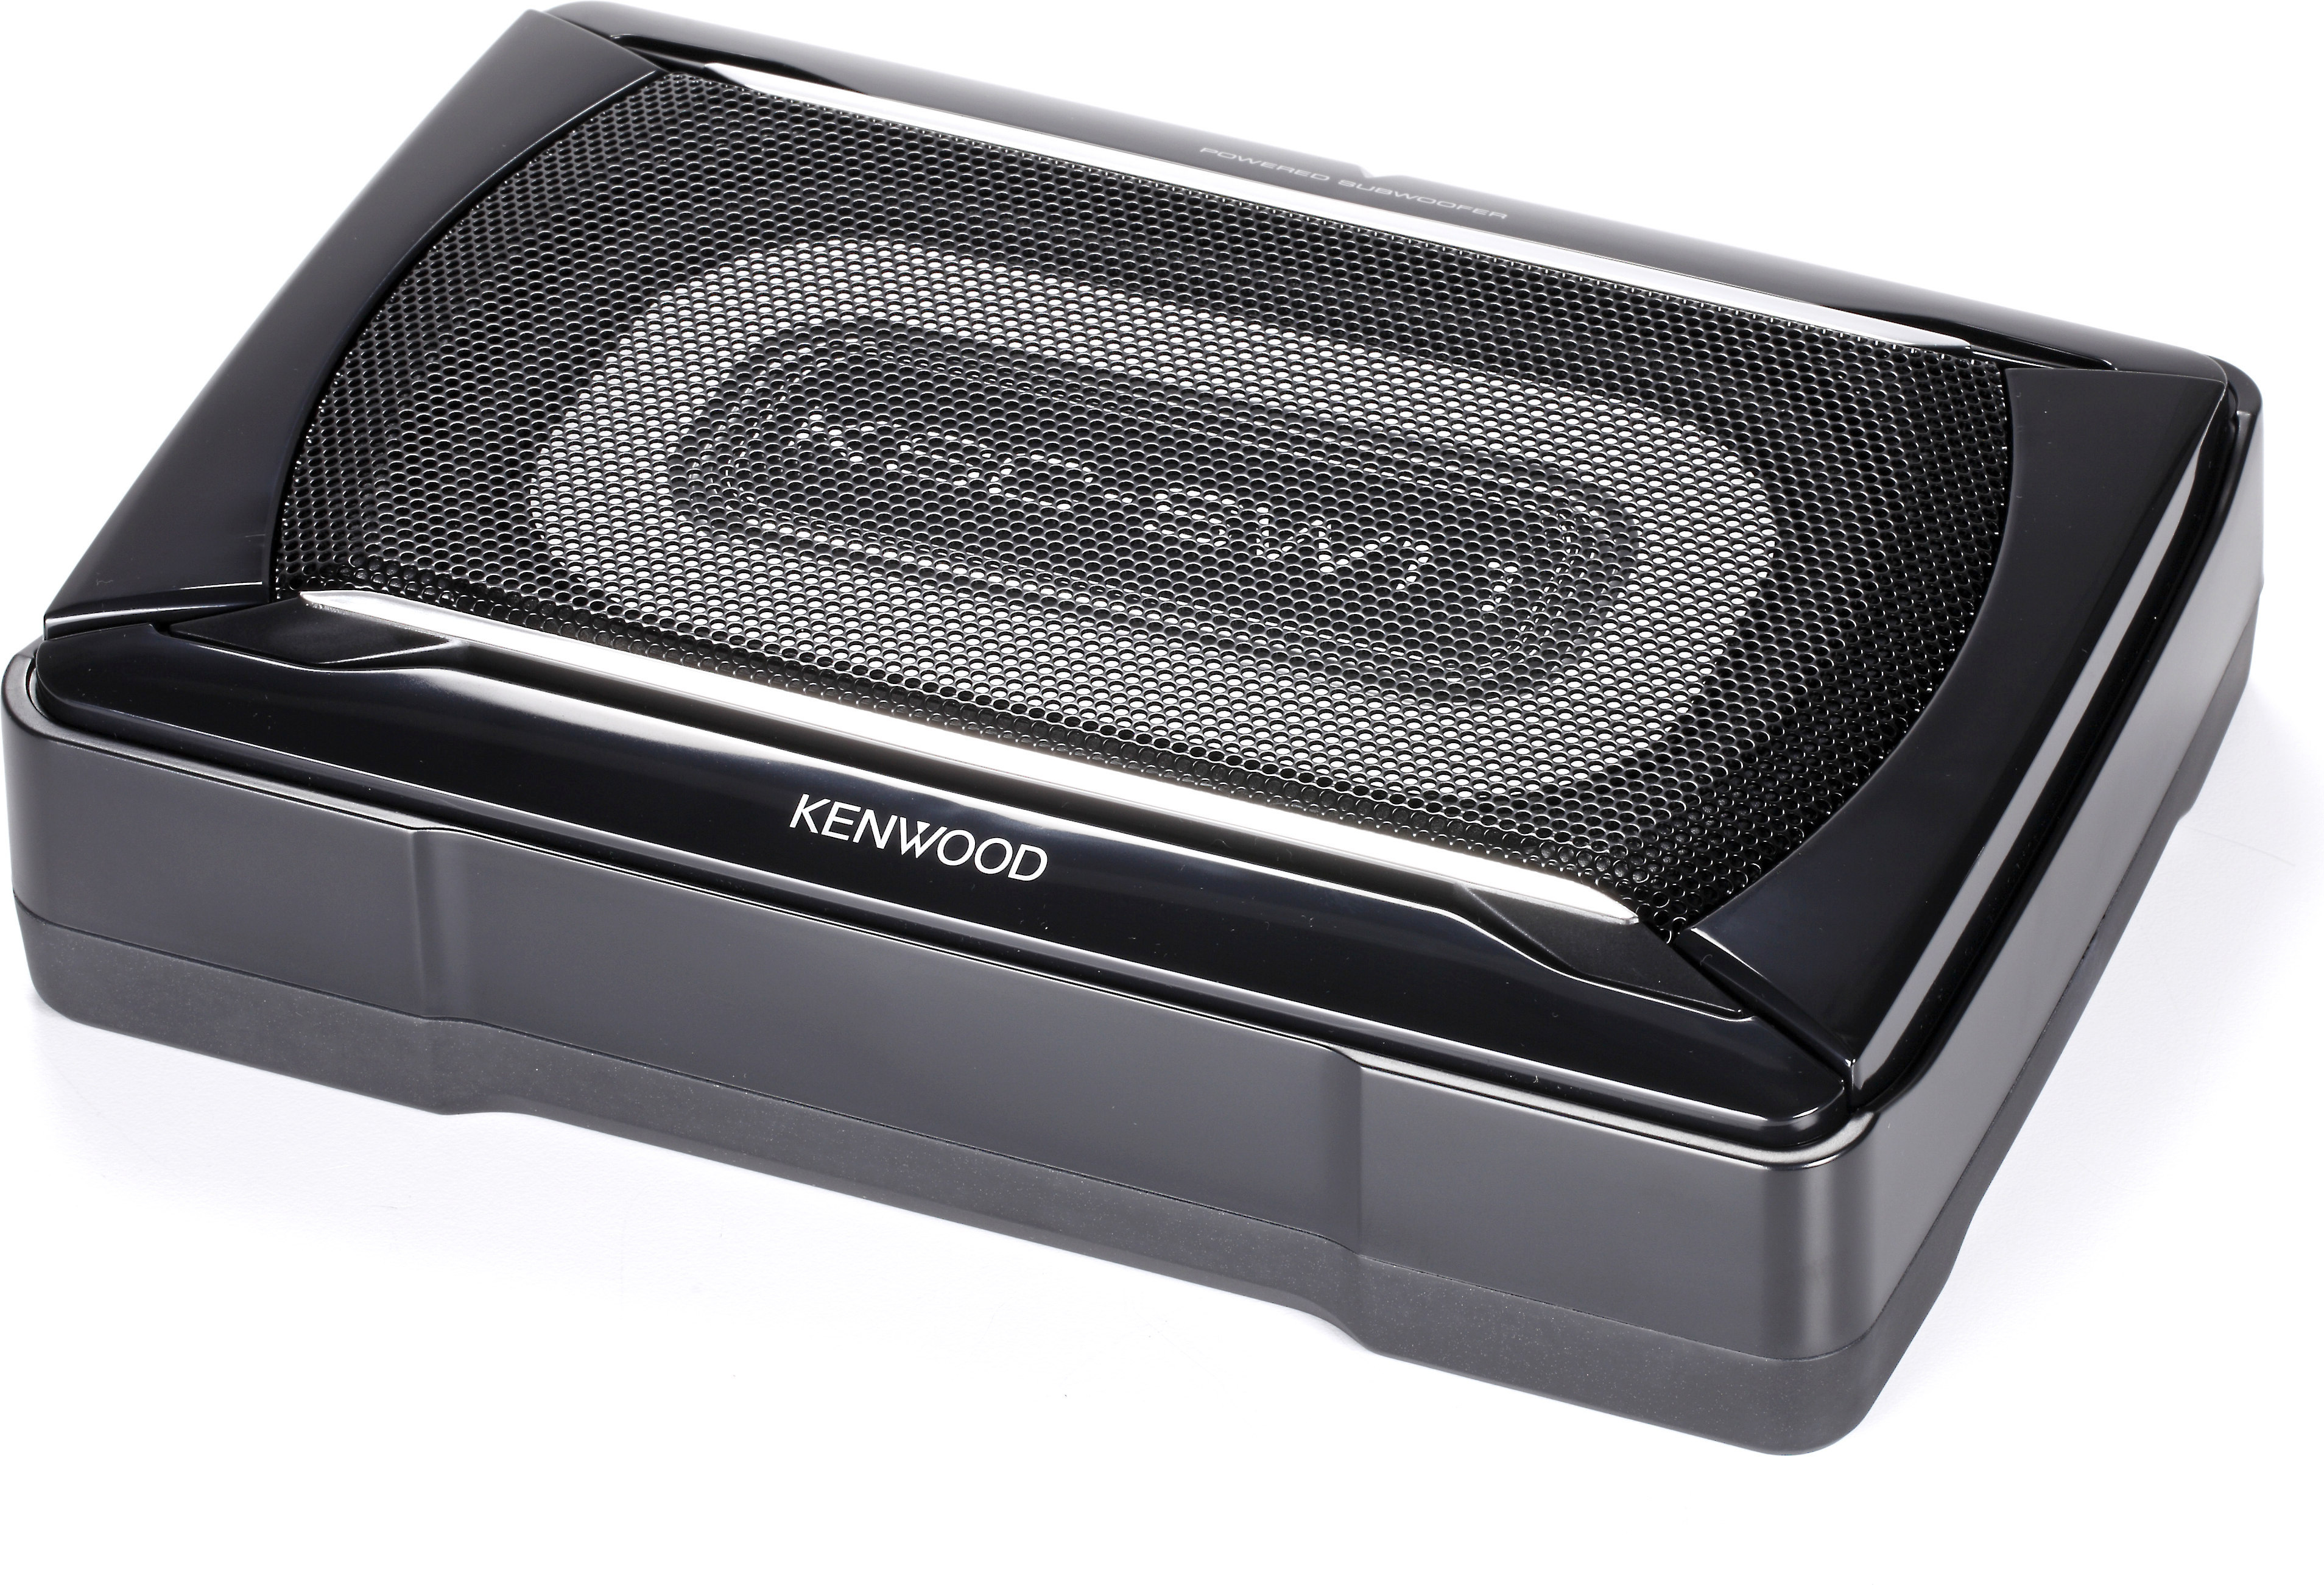 spectrum Snazzy Expliciet Customer Reviews: Kenwood KSC-SW11 Compact powered subwoofer at Crutchfield